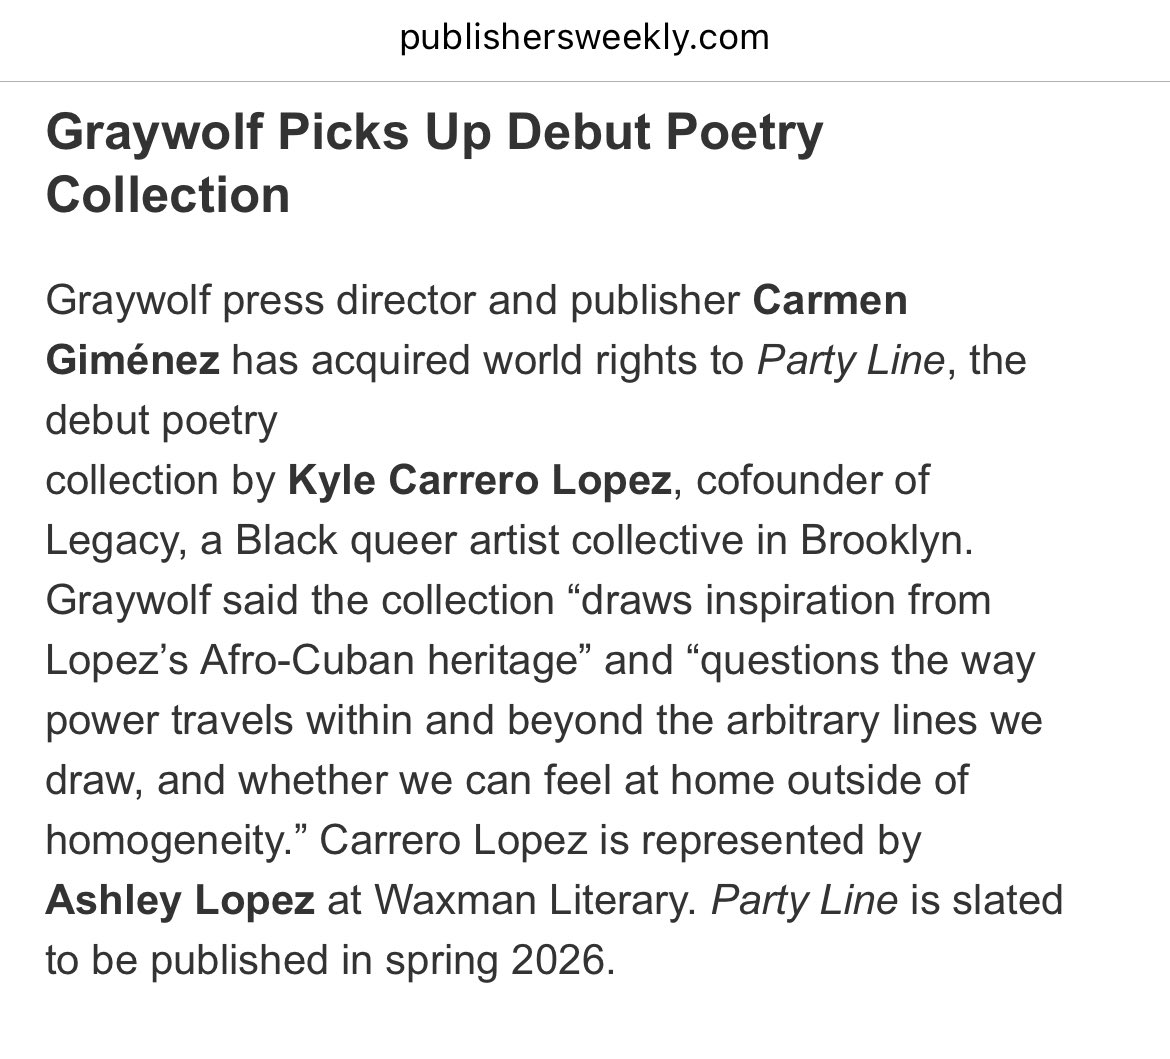 hot goss on a distant date: PARTY LINE coming 2026 from @GraywolfPress